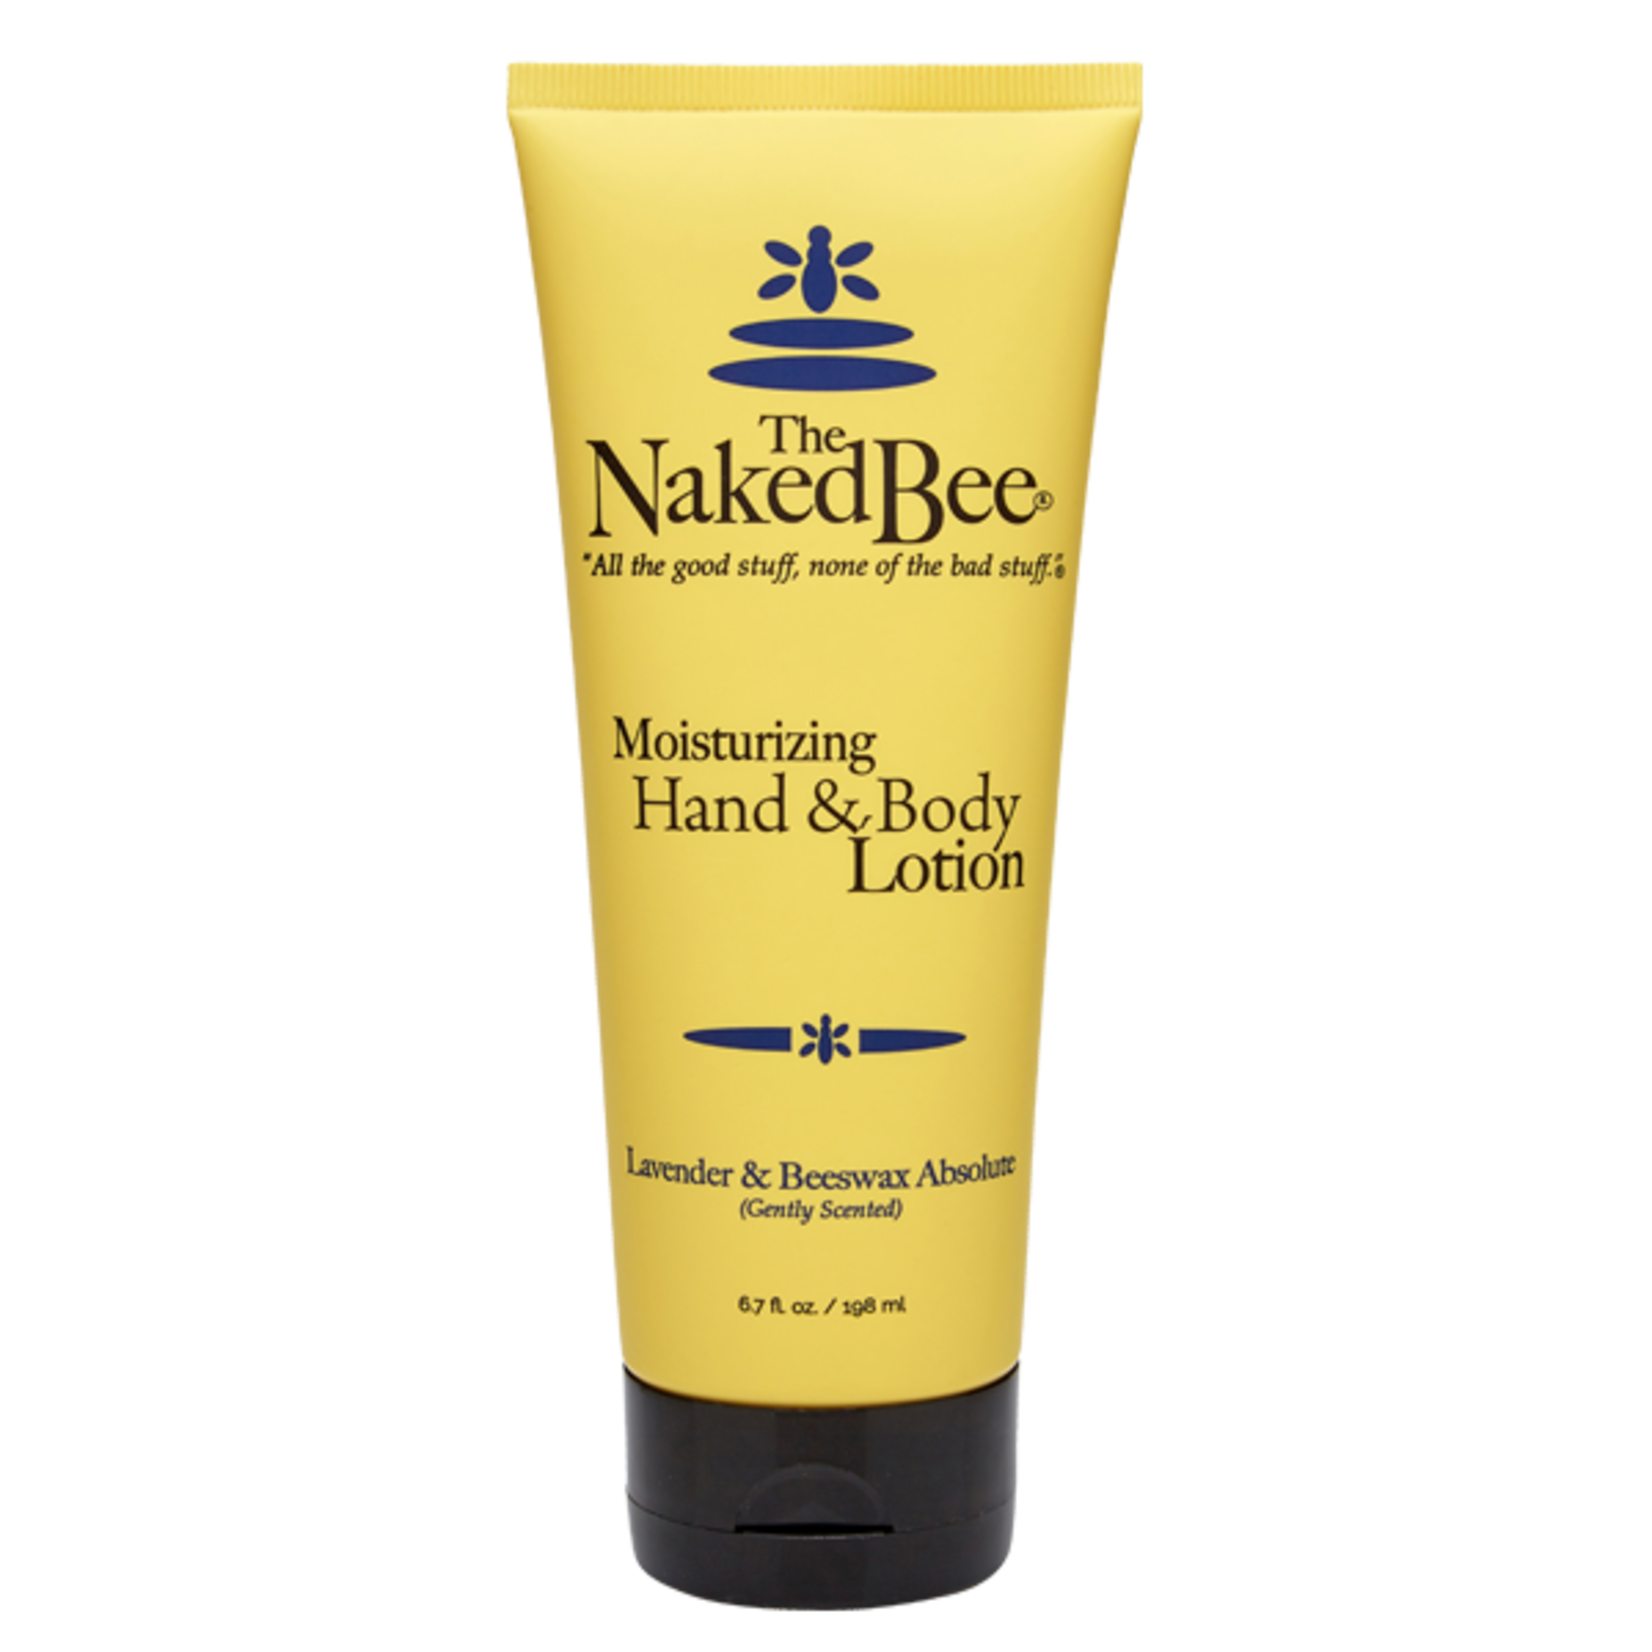 The Naked Bee The Naked Bee Moisturizing Hand & Body Lotion 6.7 oz